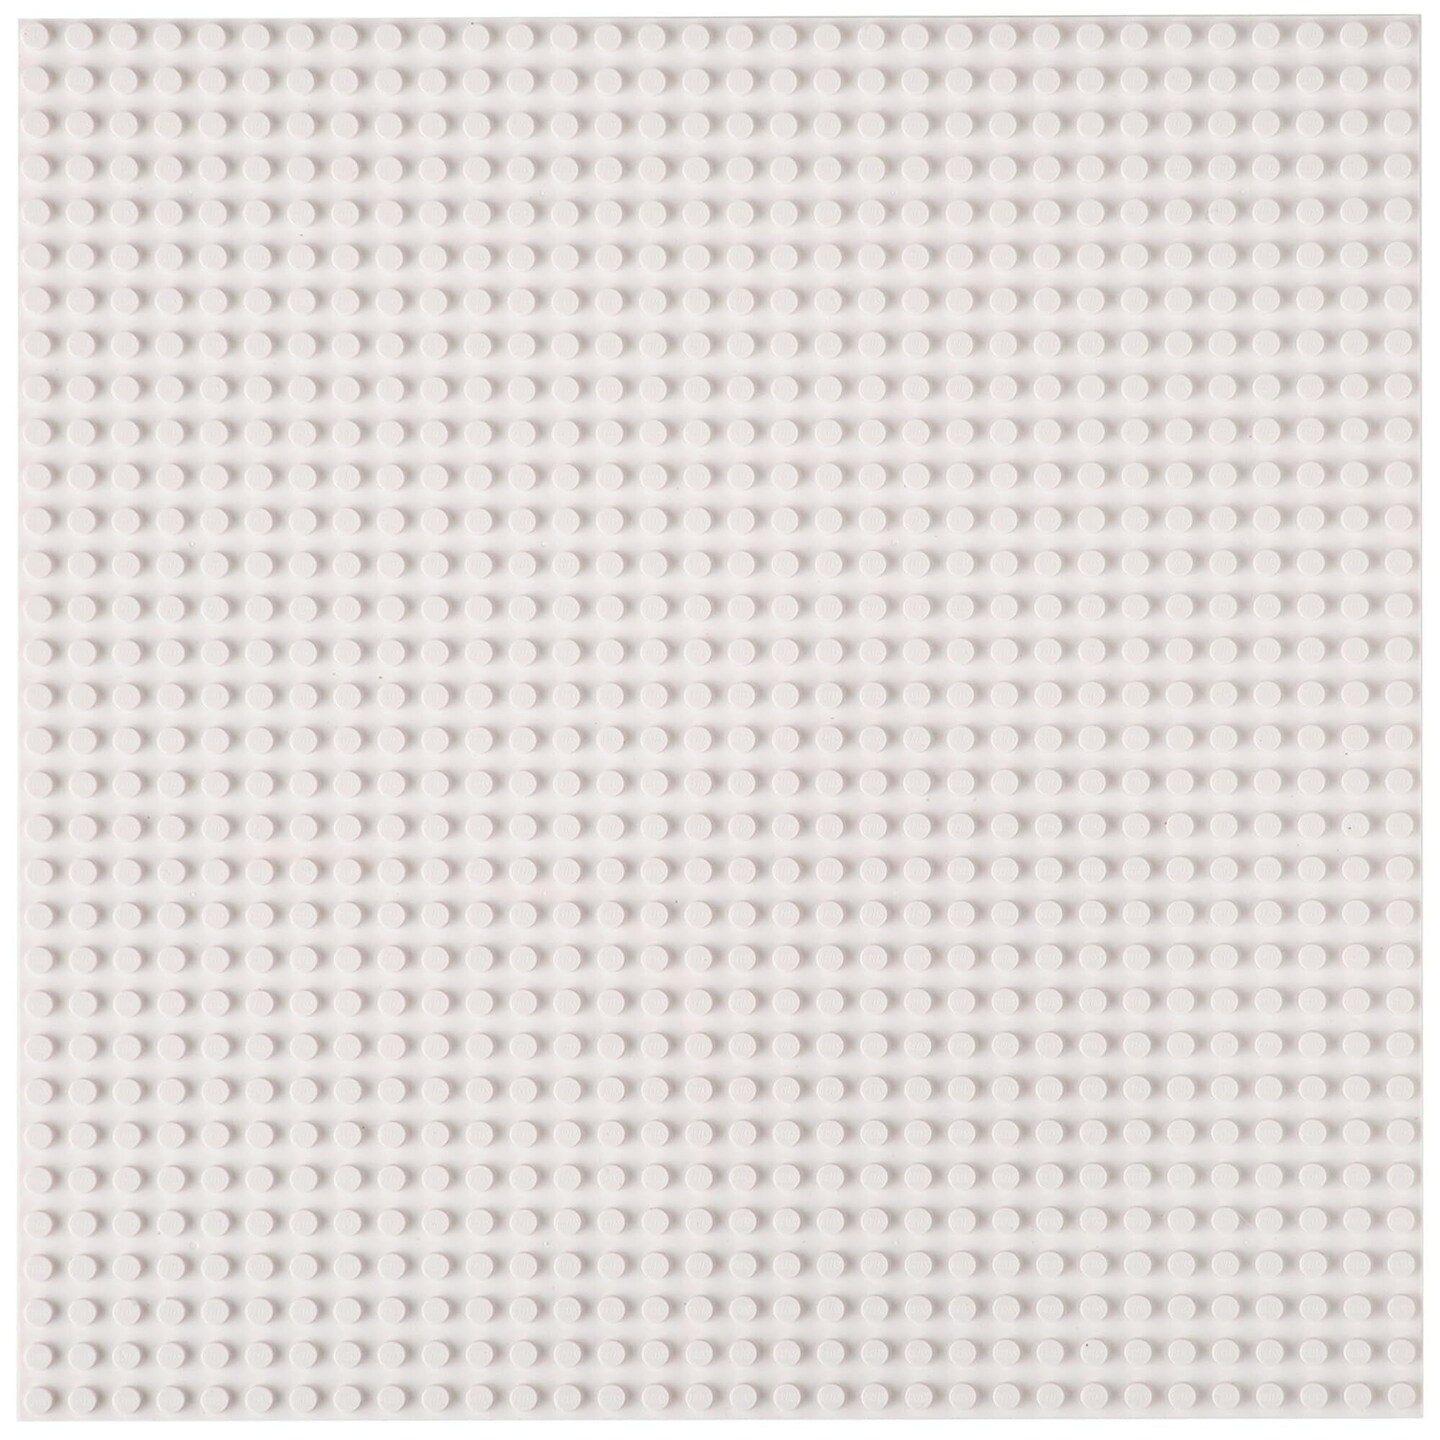 Strictly Briks Large Classic Stackable Baseplates, For Building Bricks, Bases for Tables, Mats, and More, 100% Compatible with All Major Brands, White, 1 Piece, 10x10 Inches